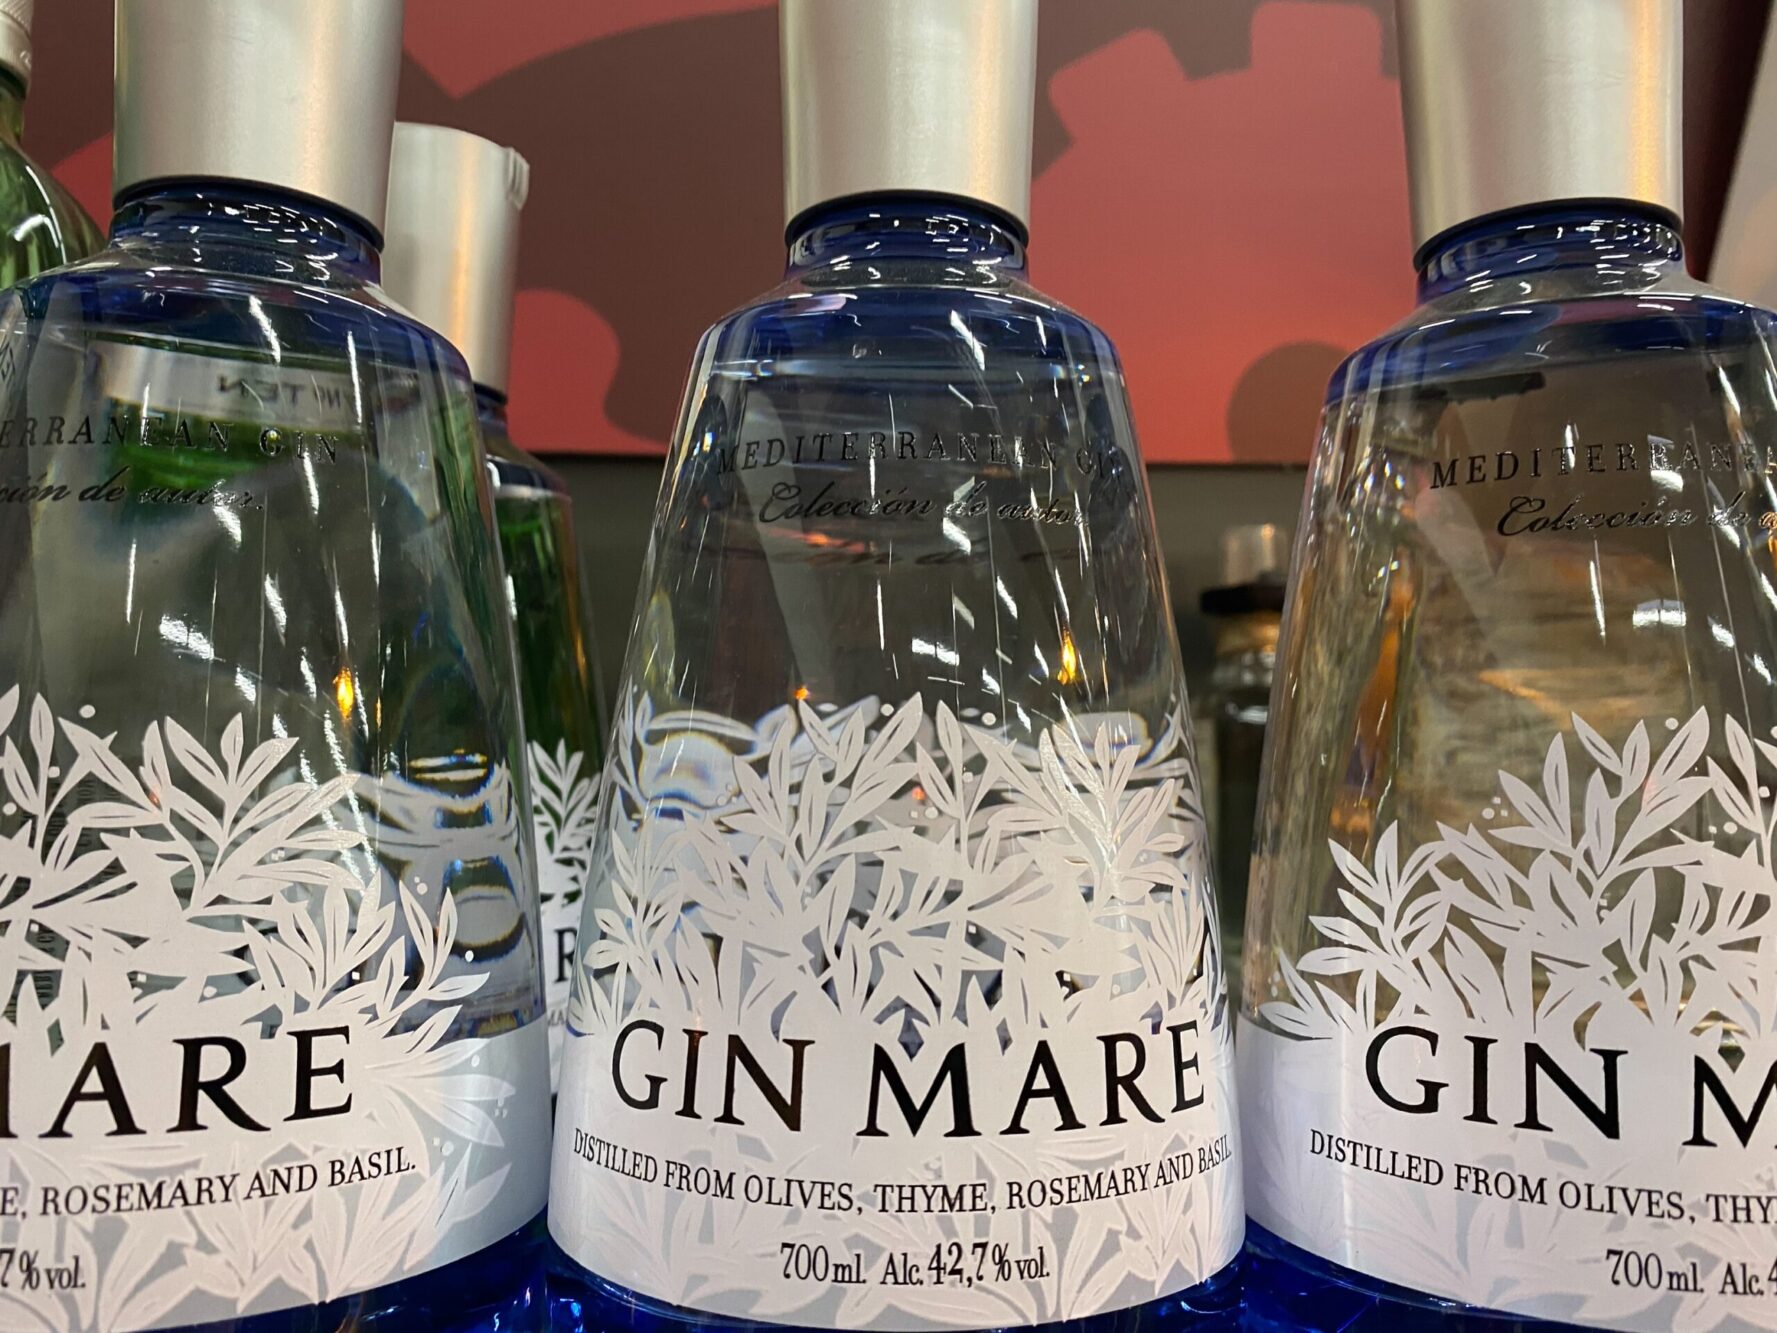 Brown-Forman reaches for gin Mare Just brand - Drinks Gin